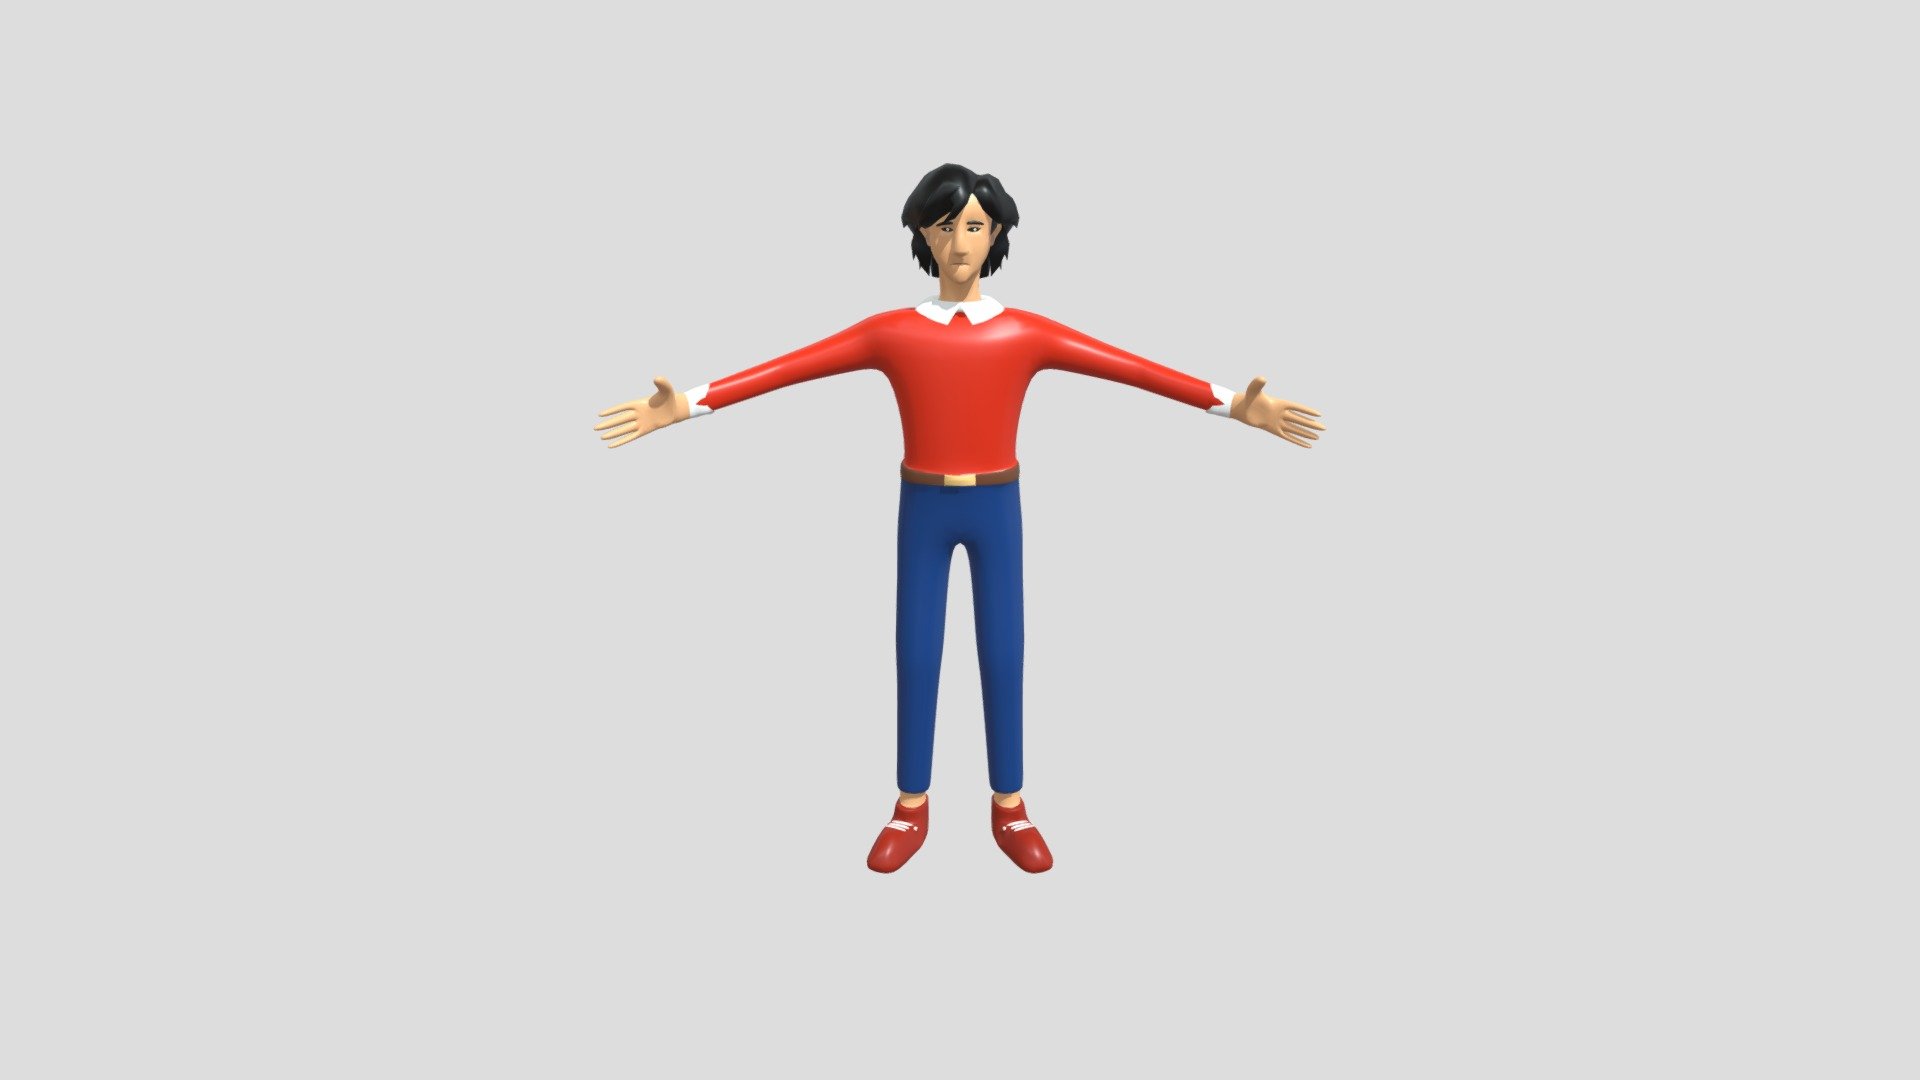 Low Poly Cartoon Character.
Not Rigged - Cartoon Character Casual Man-Low Poly - Download Free 3D model by abdullah.a 3d model